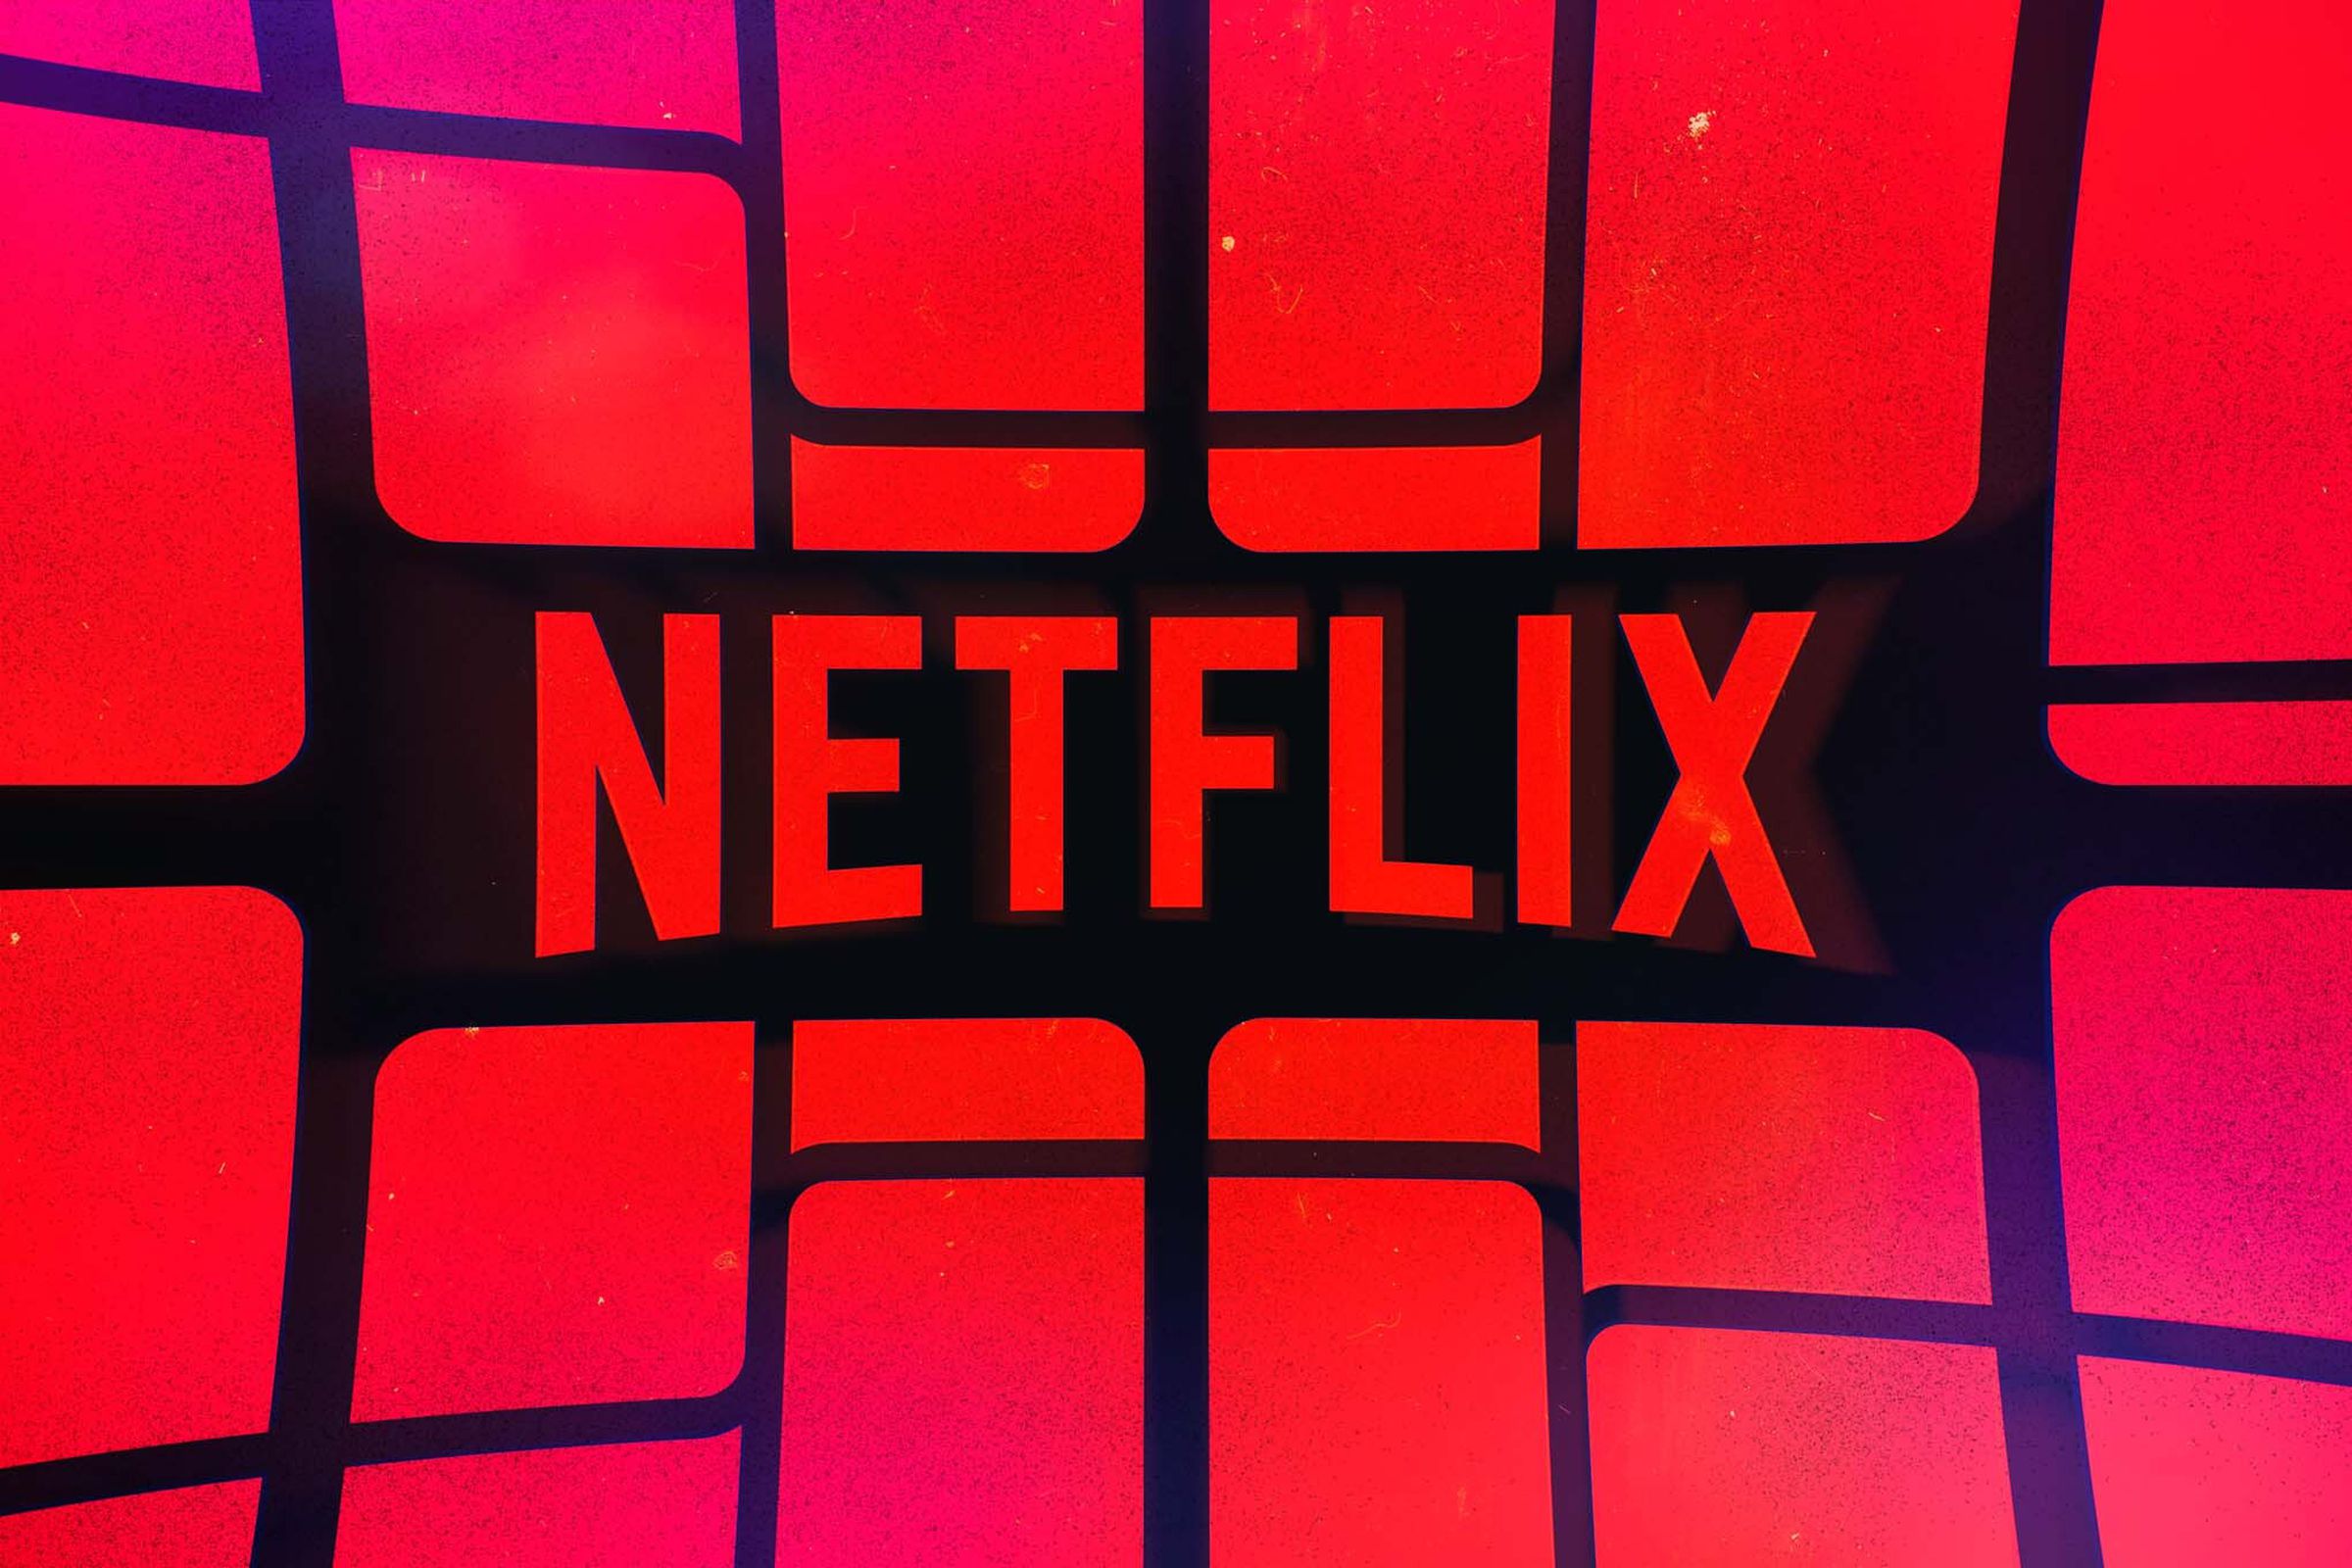 Ads could be coming to Netflix in the next few years.